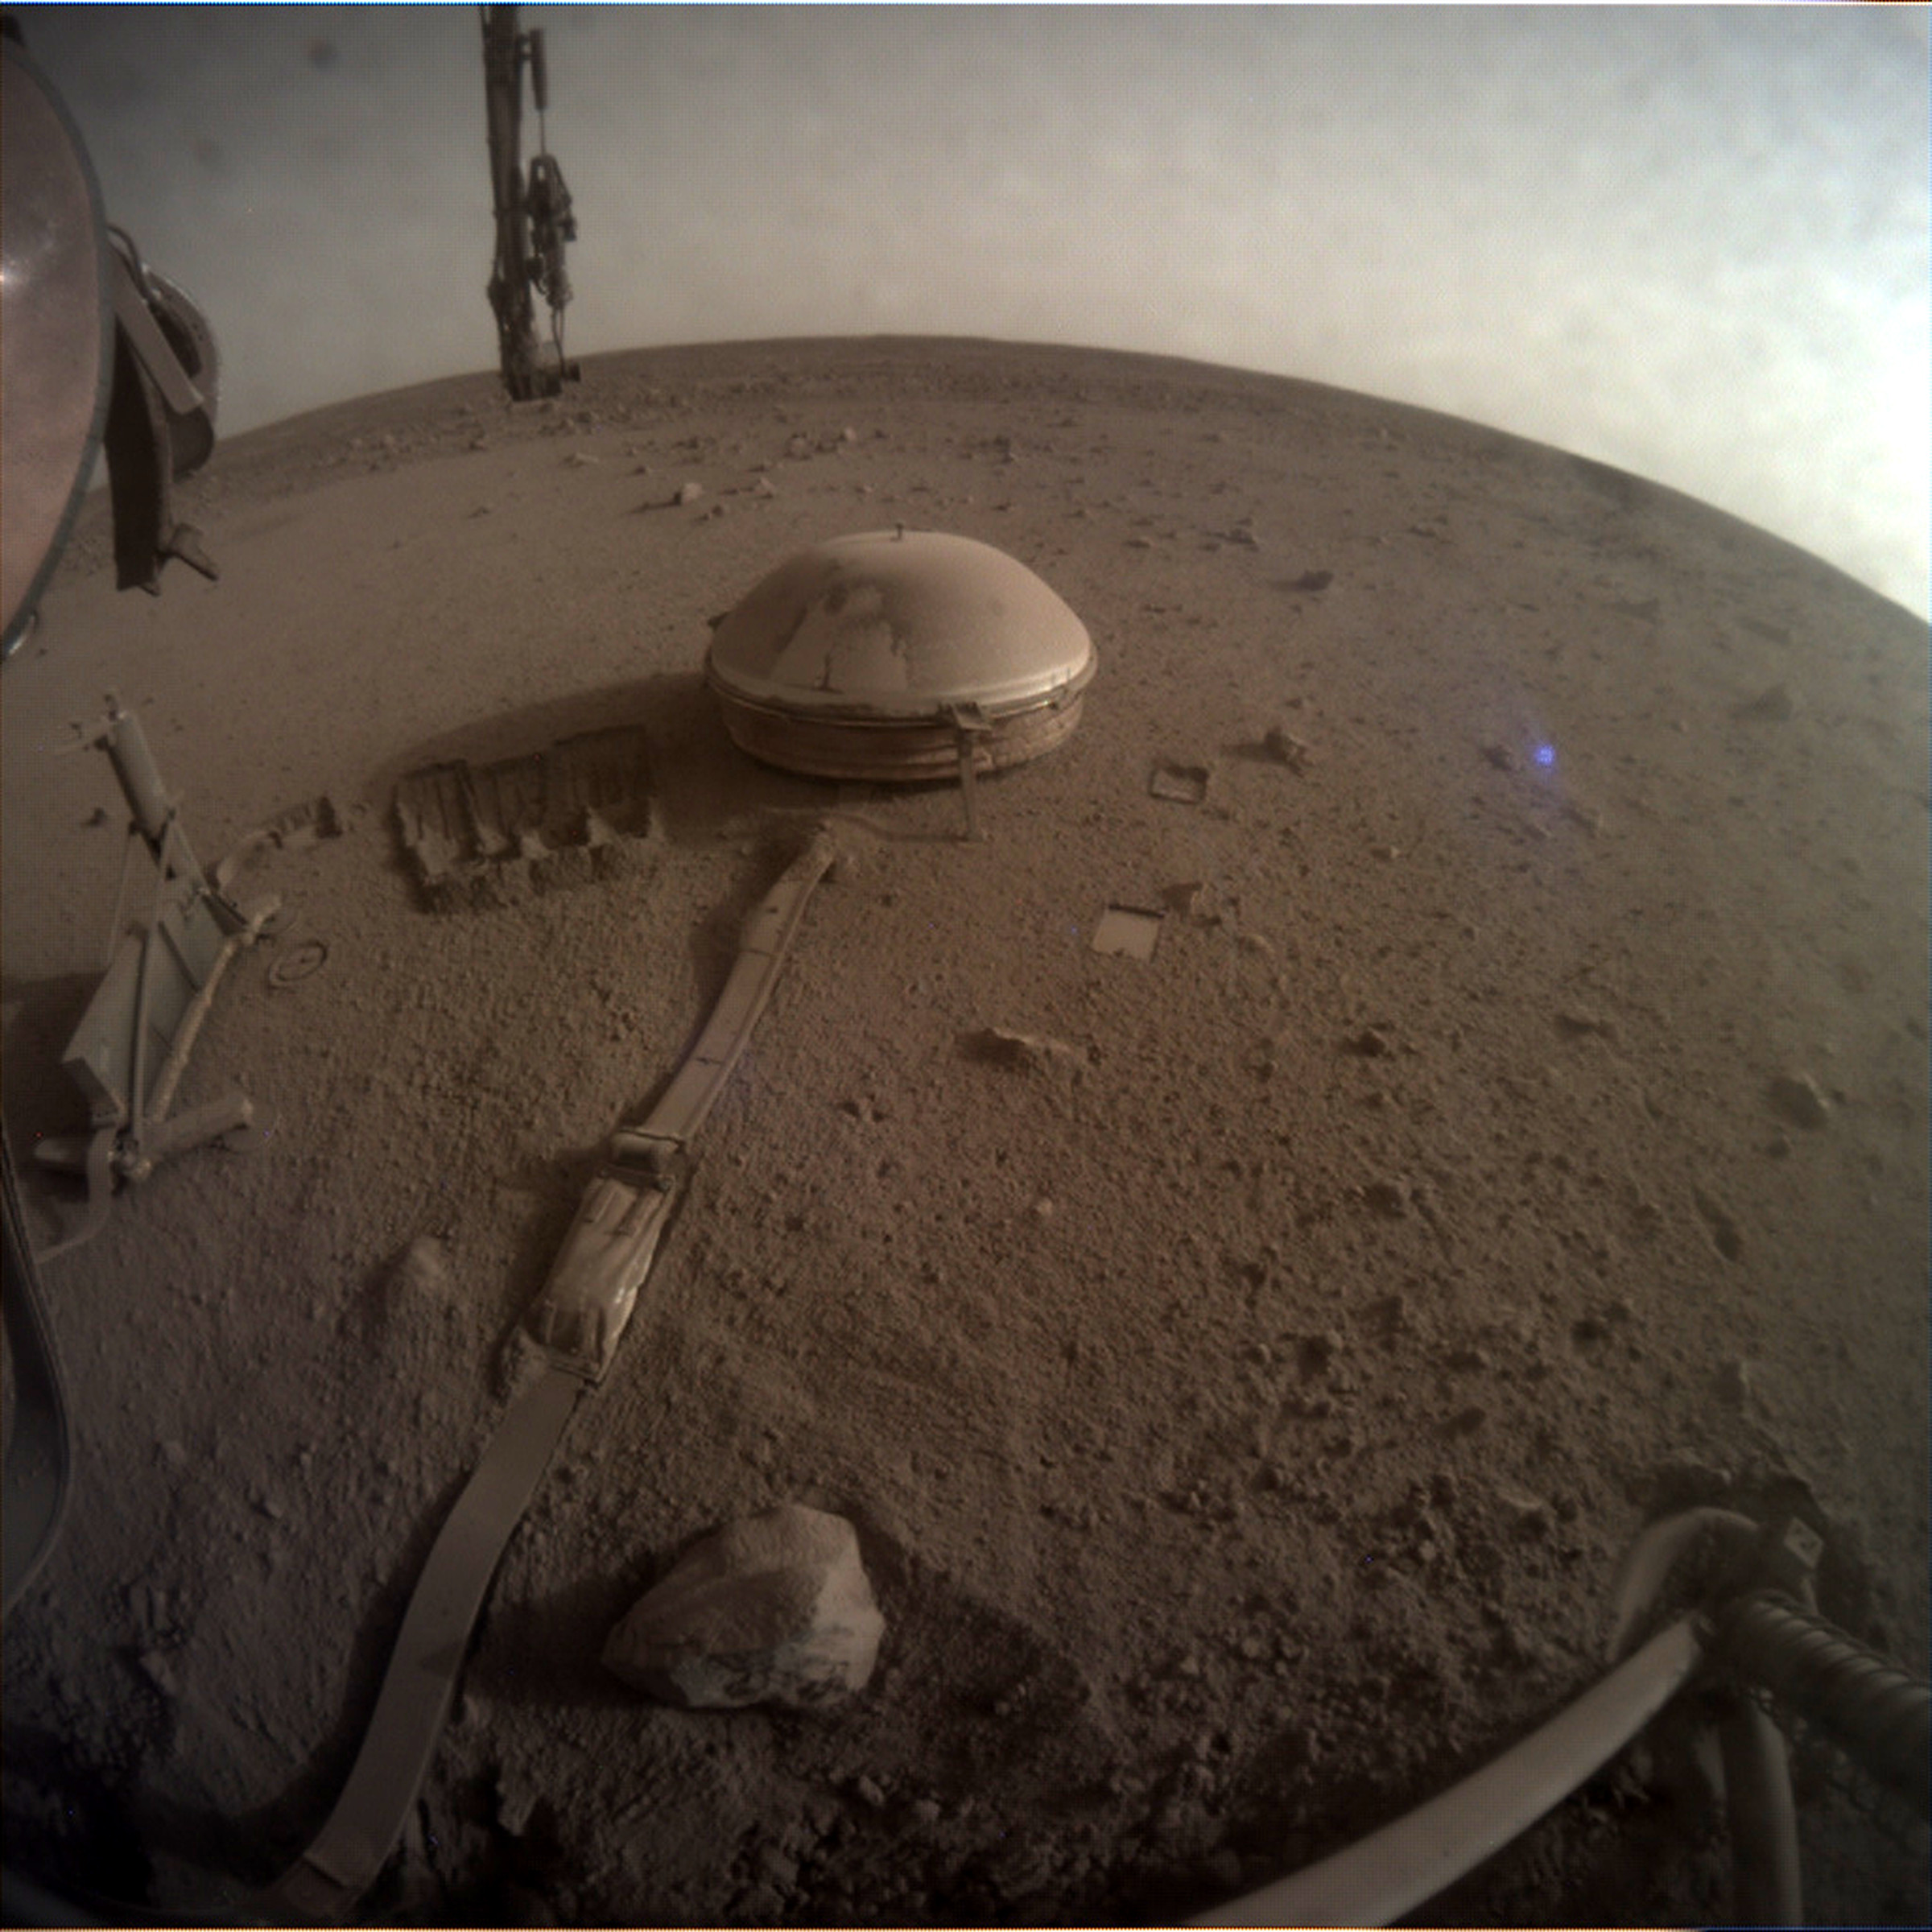 An image of dust-covered equipment sitting on a desolate Martian plain.